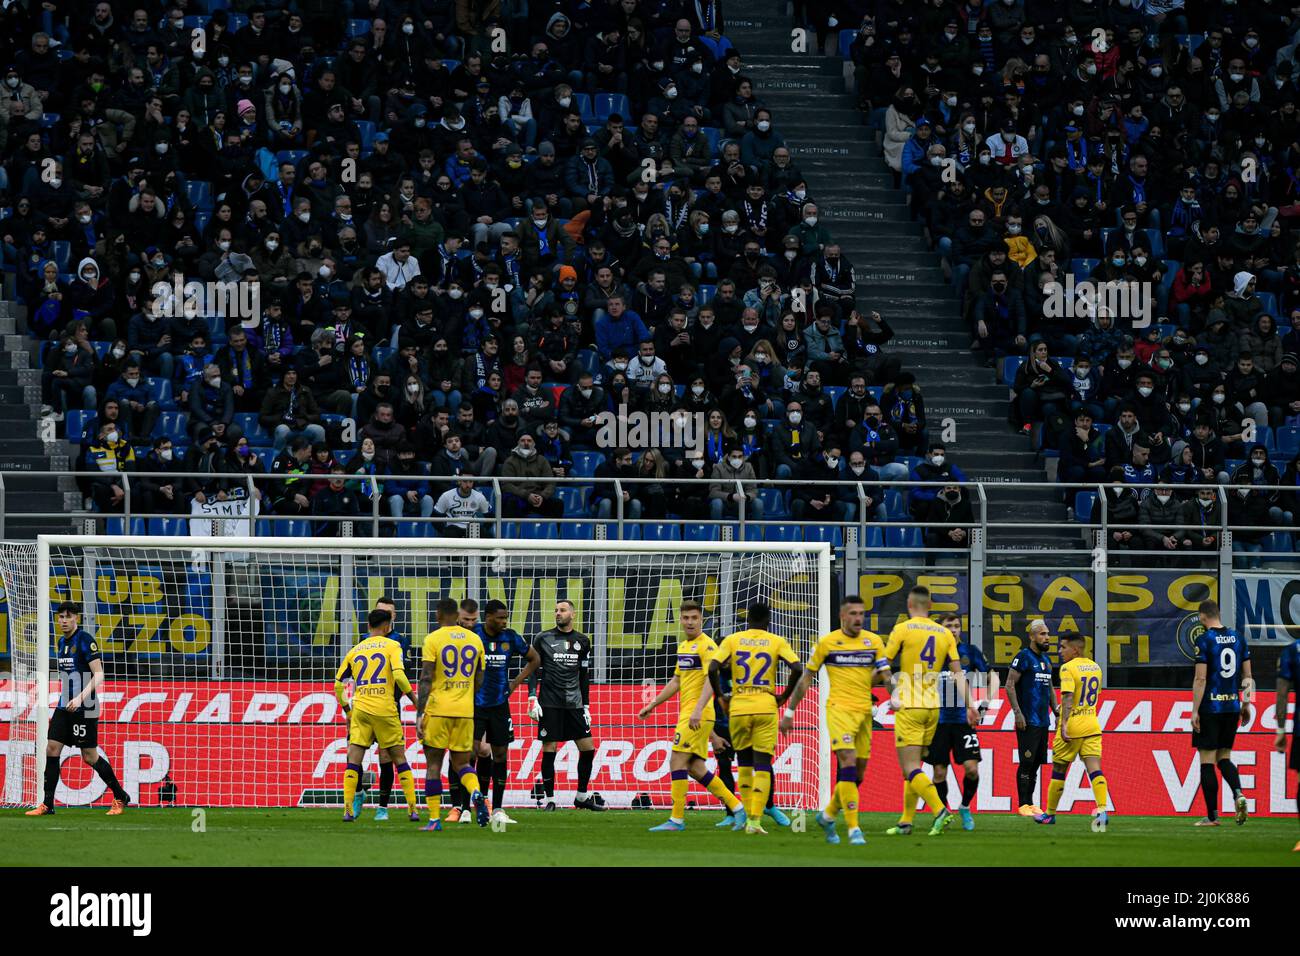 Milan, Italy - March 19, 2022: a general view during the Italian Serie A football championship match FC Internazionale vs ACF Fiorentina at San Siro Stadium Stock Photo